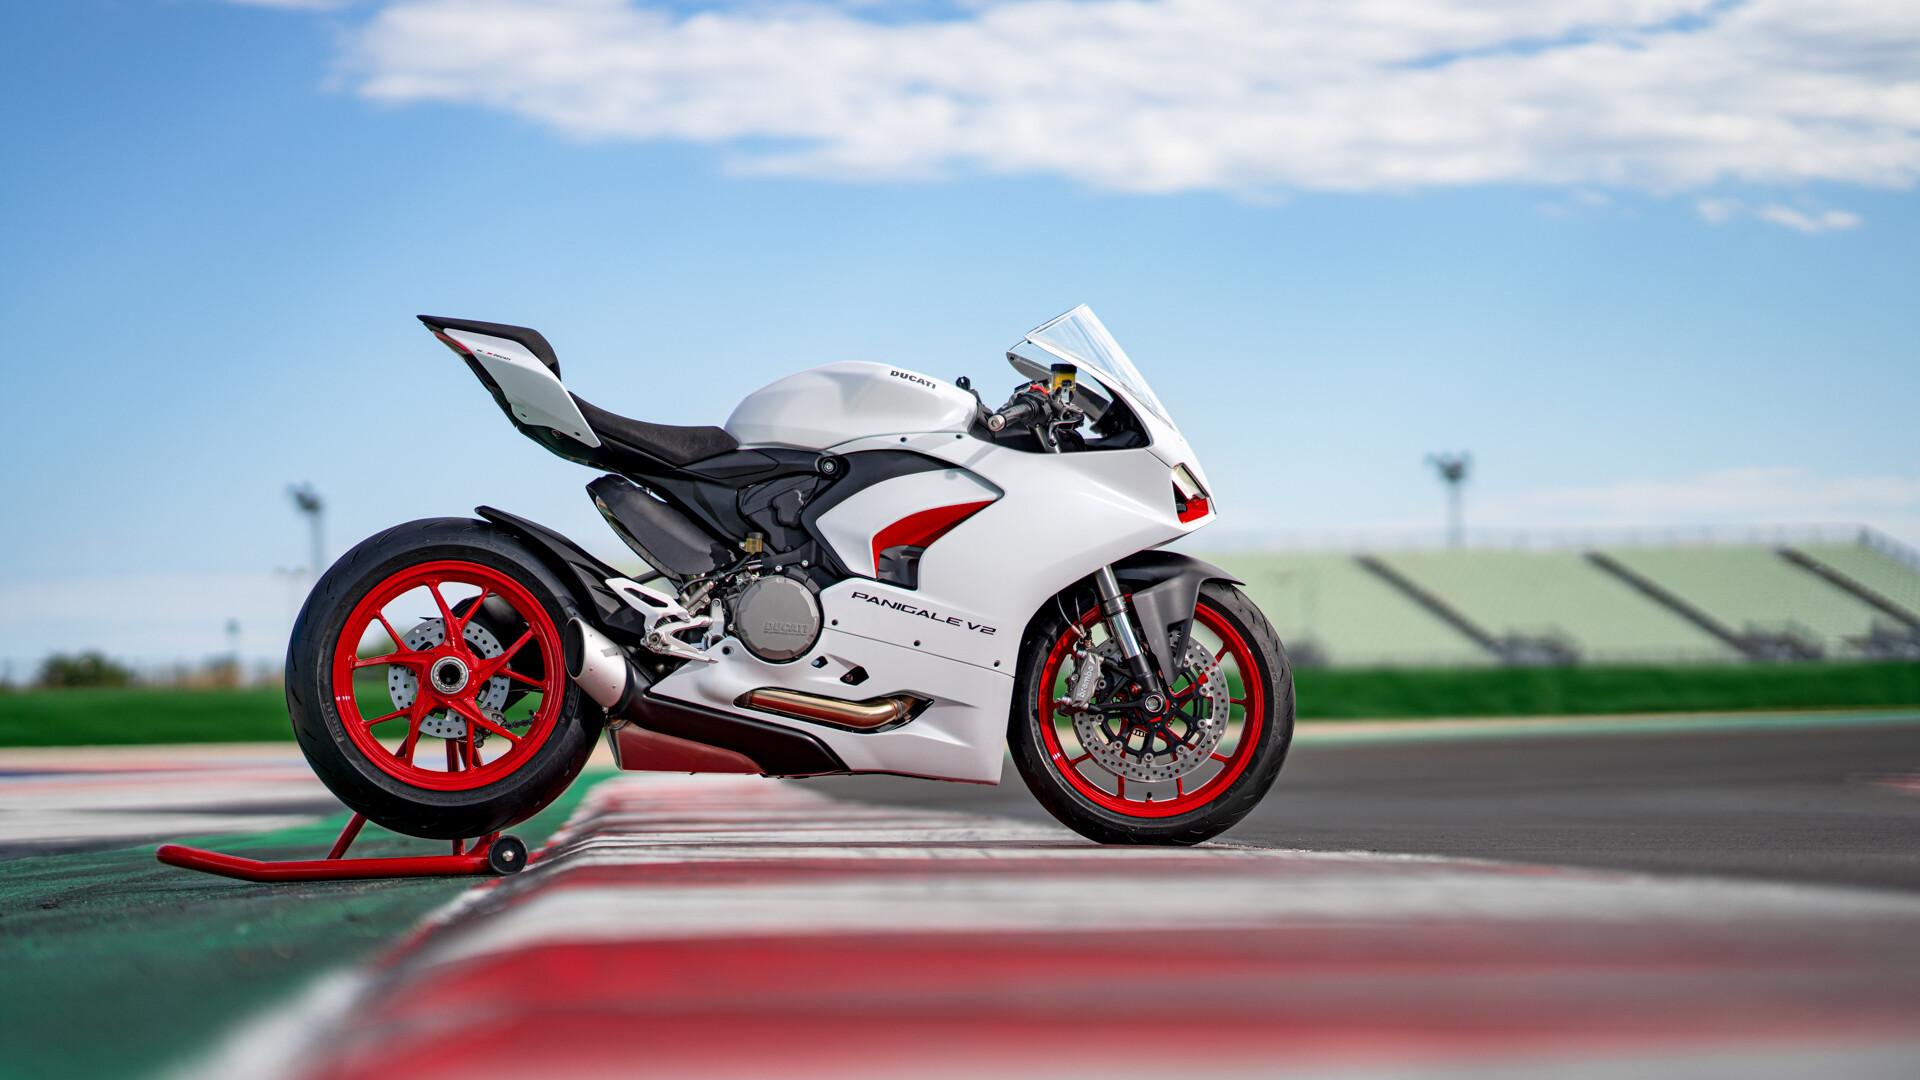 Ducati Panigale V2: White Rosso livery, Revealed on July 1, 2020. 1920x1080 Full HD Wallpaper.